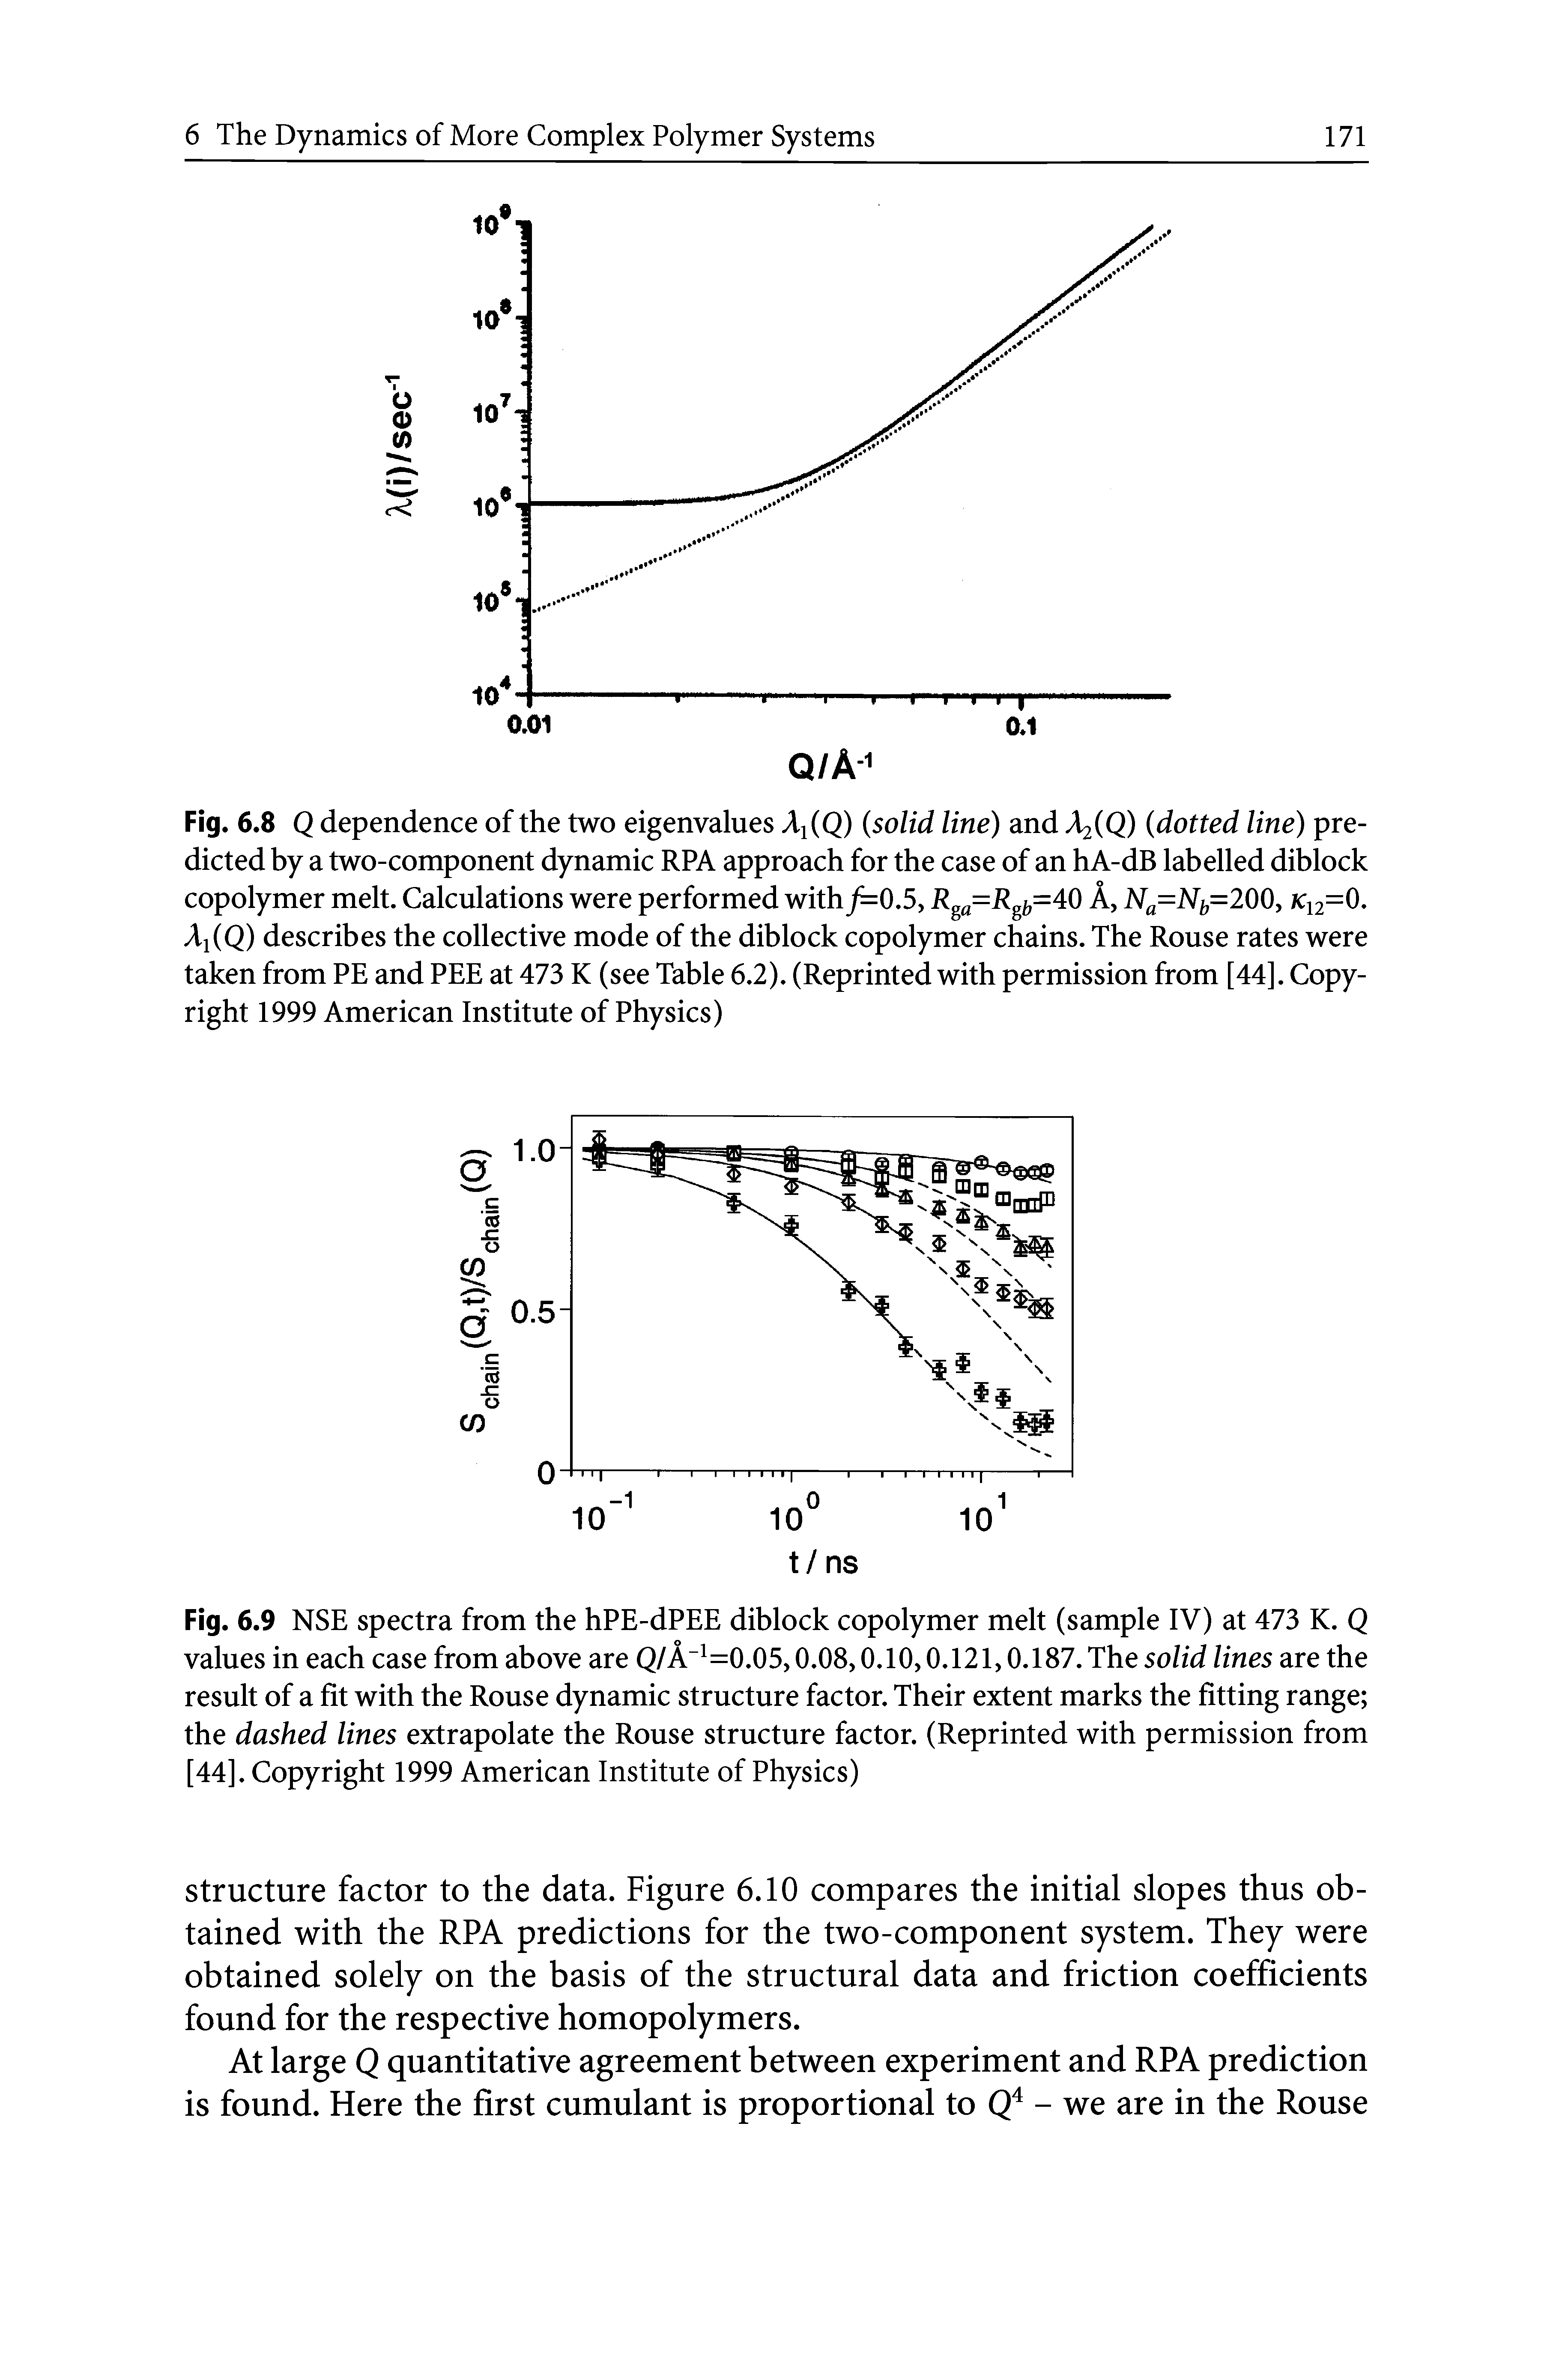 Fig. 6.8 Q dependence of the two eigenvalues Ai(Q) solid line) and A2(Q) dotted line) predicted by a two-component dynamic RPA approach for the case of an hA-dB labelled diblock copolymer melt. Calculations were performed with/=0.5, Rg =Rg =40 A, Na=Ny=200, Ku=0, Ai(Q) describes the collective mode of the diblock copolymer chains. The Rouse rates were taken from PE and PEE at 473 K (see Table 6.2). (Reprinted with permission from [44]. Copyright 1999 American Institute of Physics)...